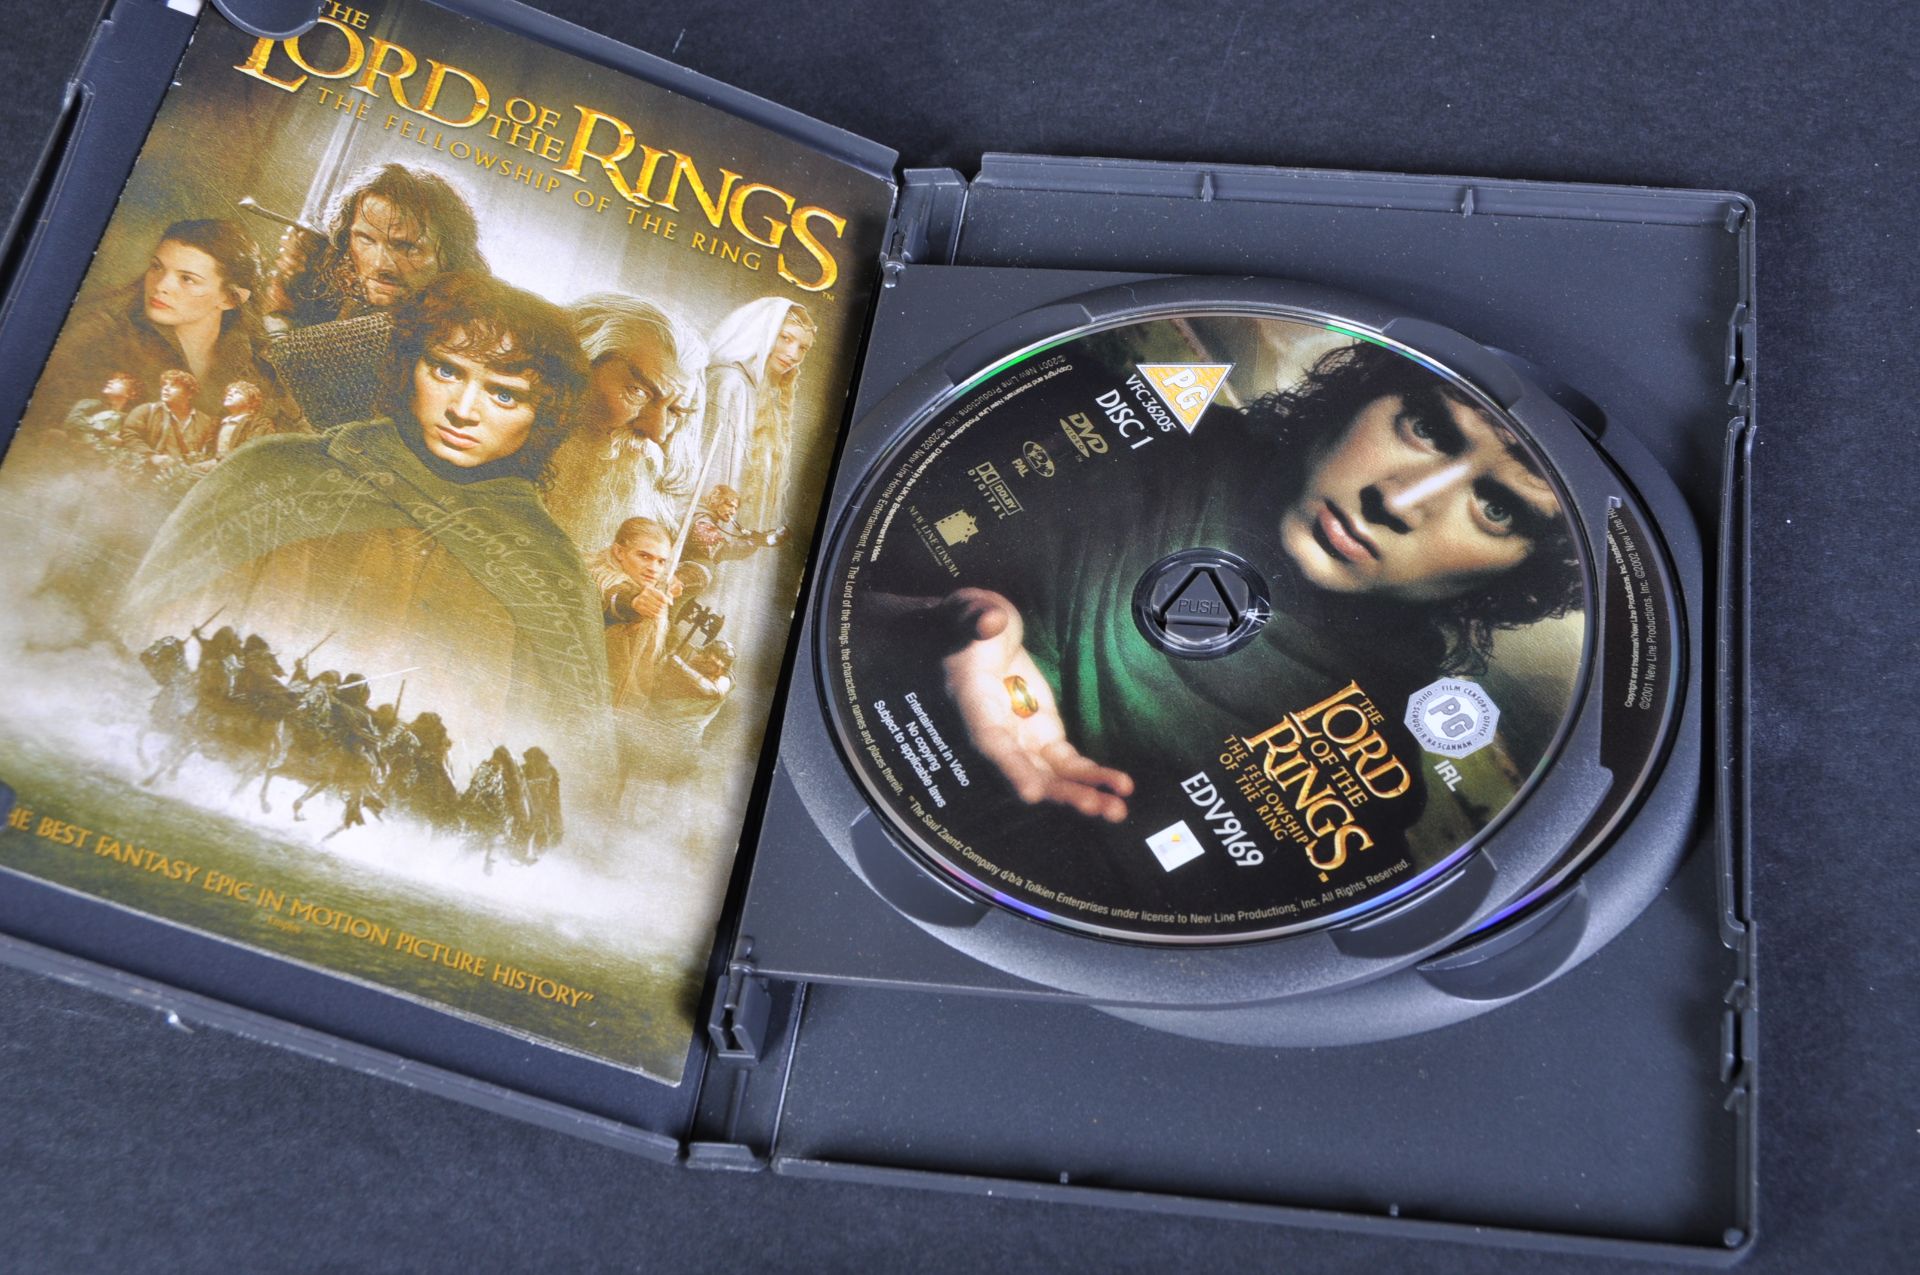 LORD OF THE RINGS - THE FELLOWSHIP OF THE RING - SIGNED DVD - Image 5 of 5